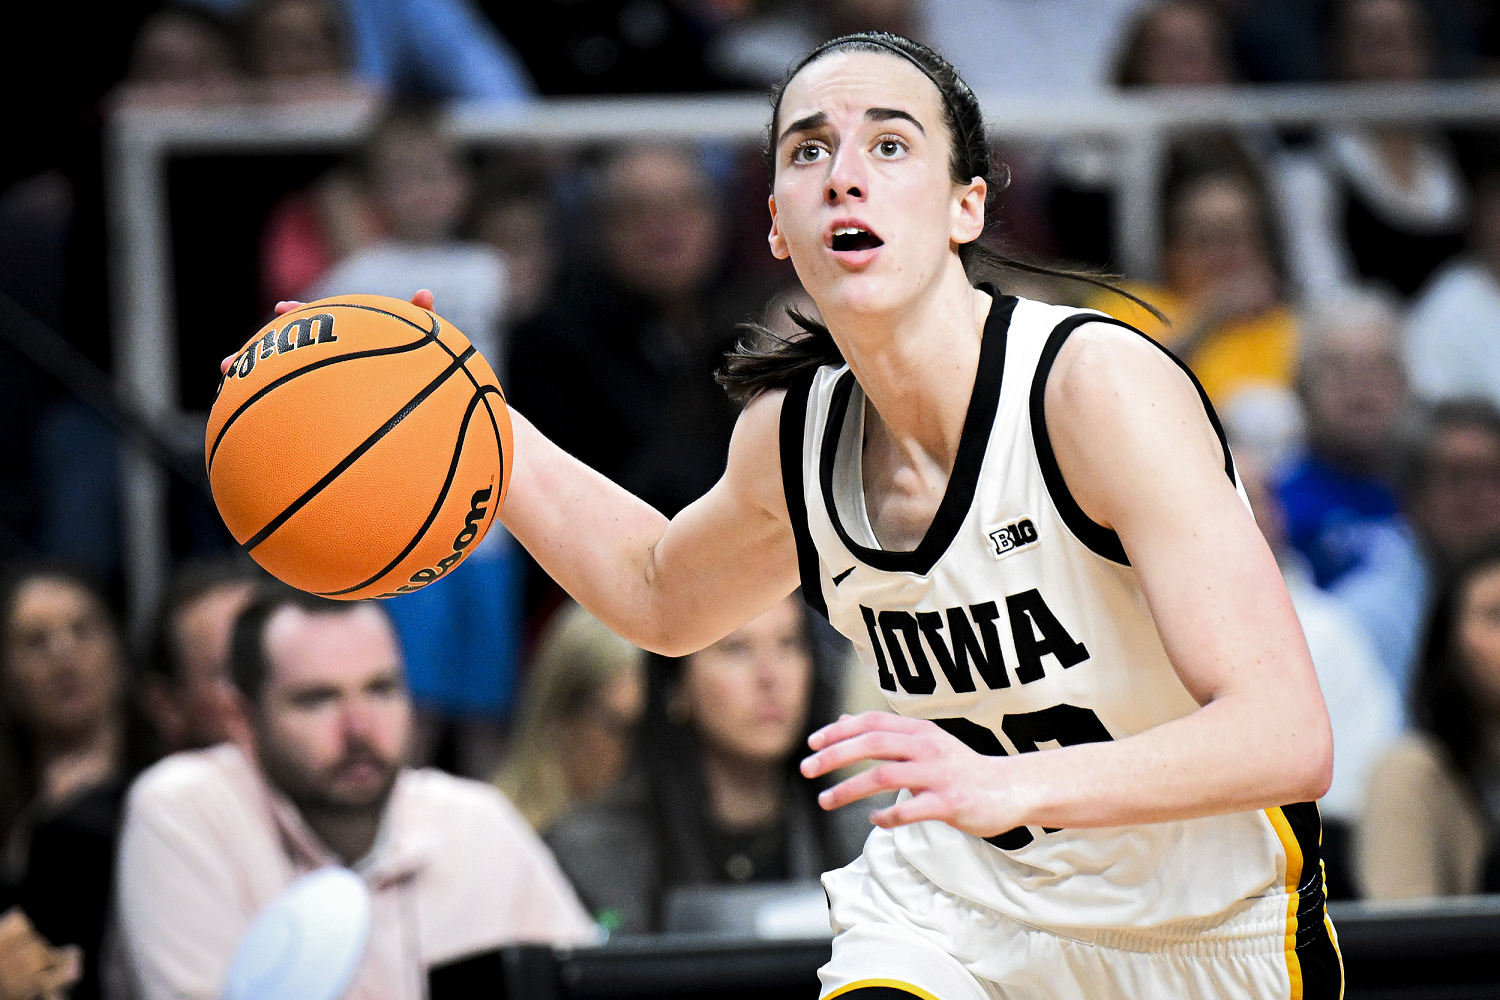 Women's college basketball championship expected to set new viewership records amid Caitlin Clark mania